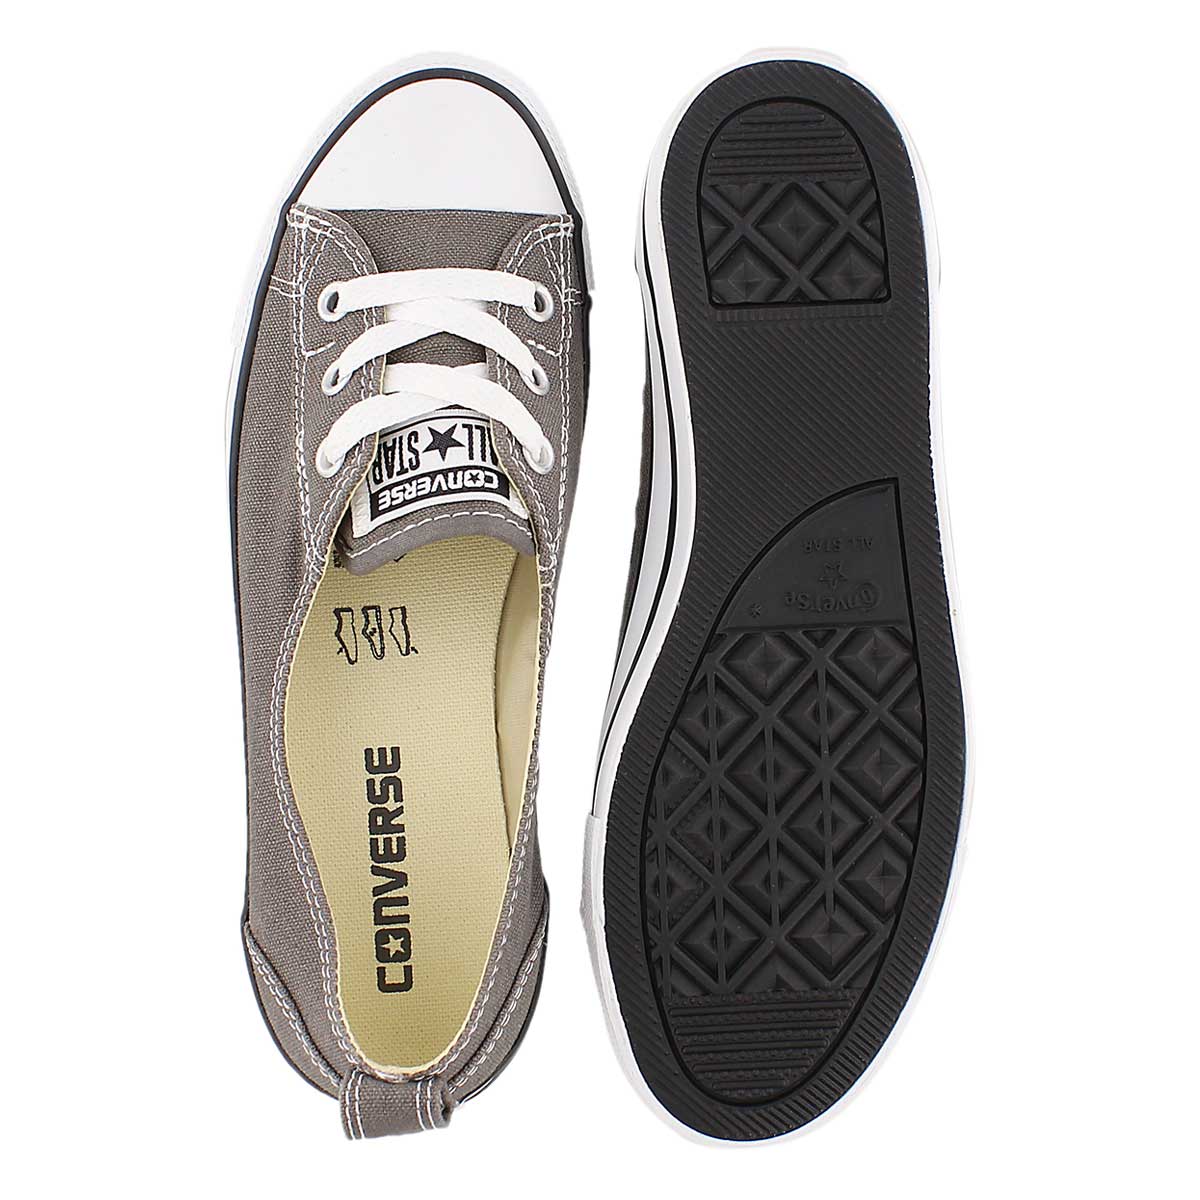 Converse Women's CT ALL STAR BALLET LACE charcoal slip-ons